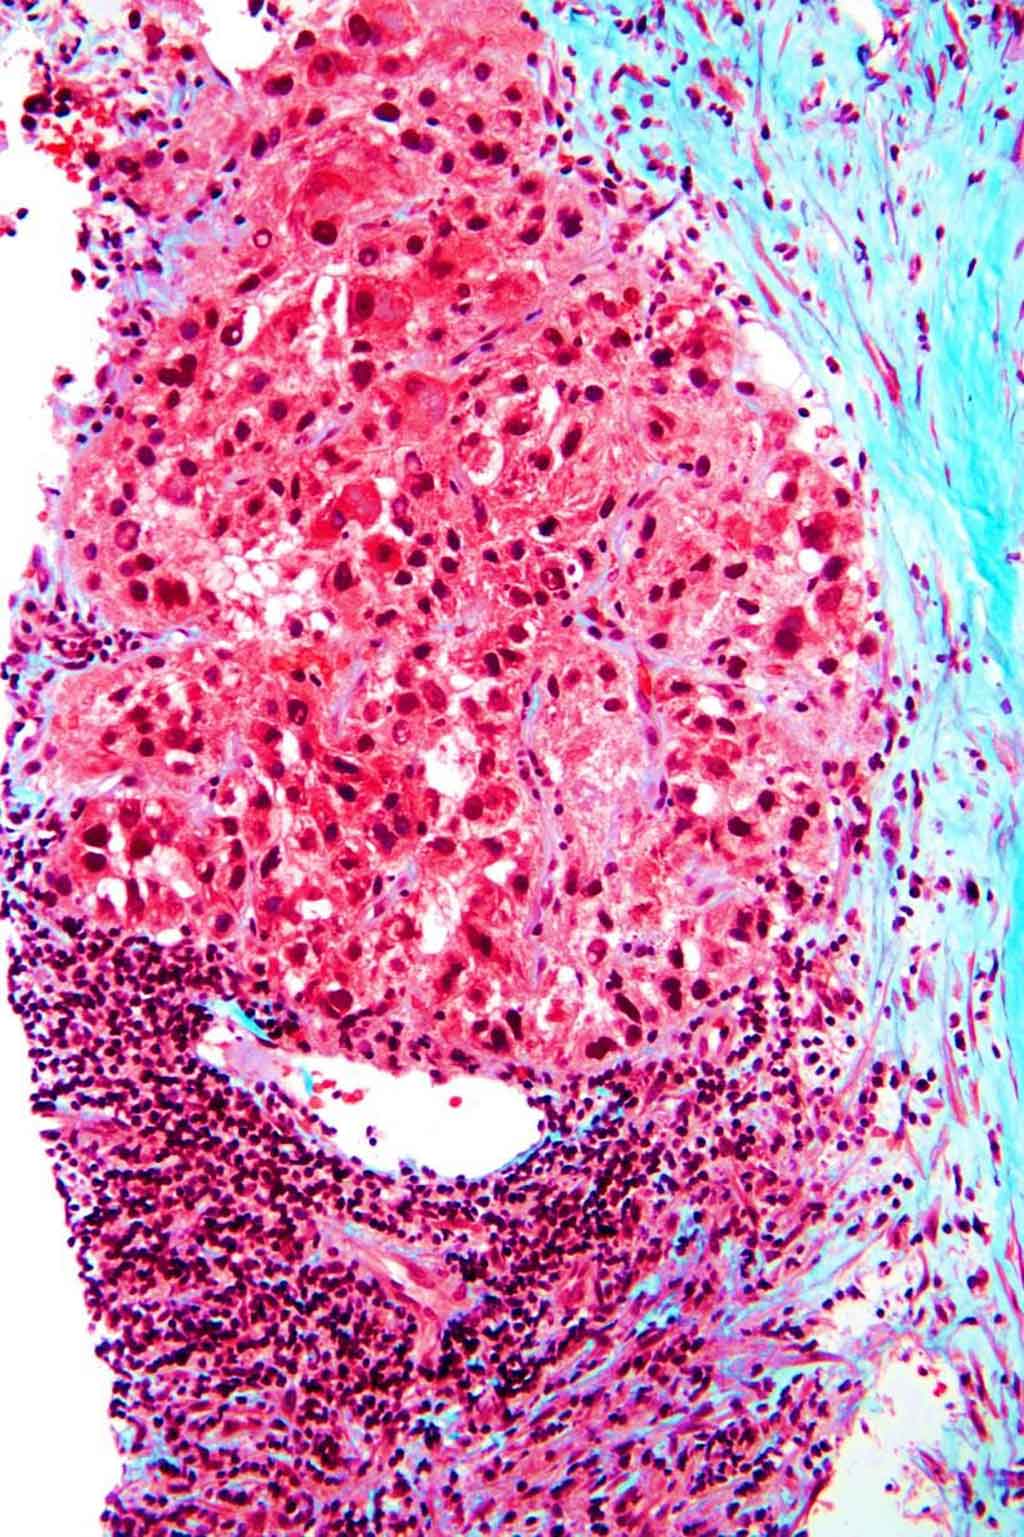 Image: Photomicrograph of histopathology of hepatocellular carcinoma, the most common form of primary liver cancer, showing end-stage cirrhosis - blue collagen (fibrosis) Mallory bodies; loss of normal liver architecture; and nuclear atypia. (Photo courtesy of Nephron).